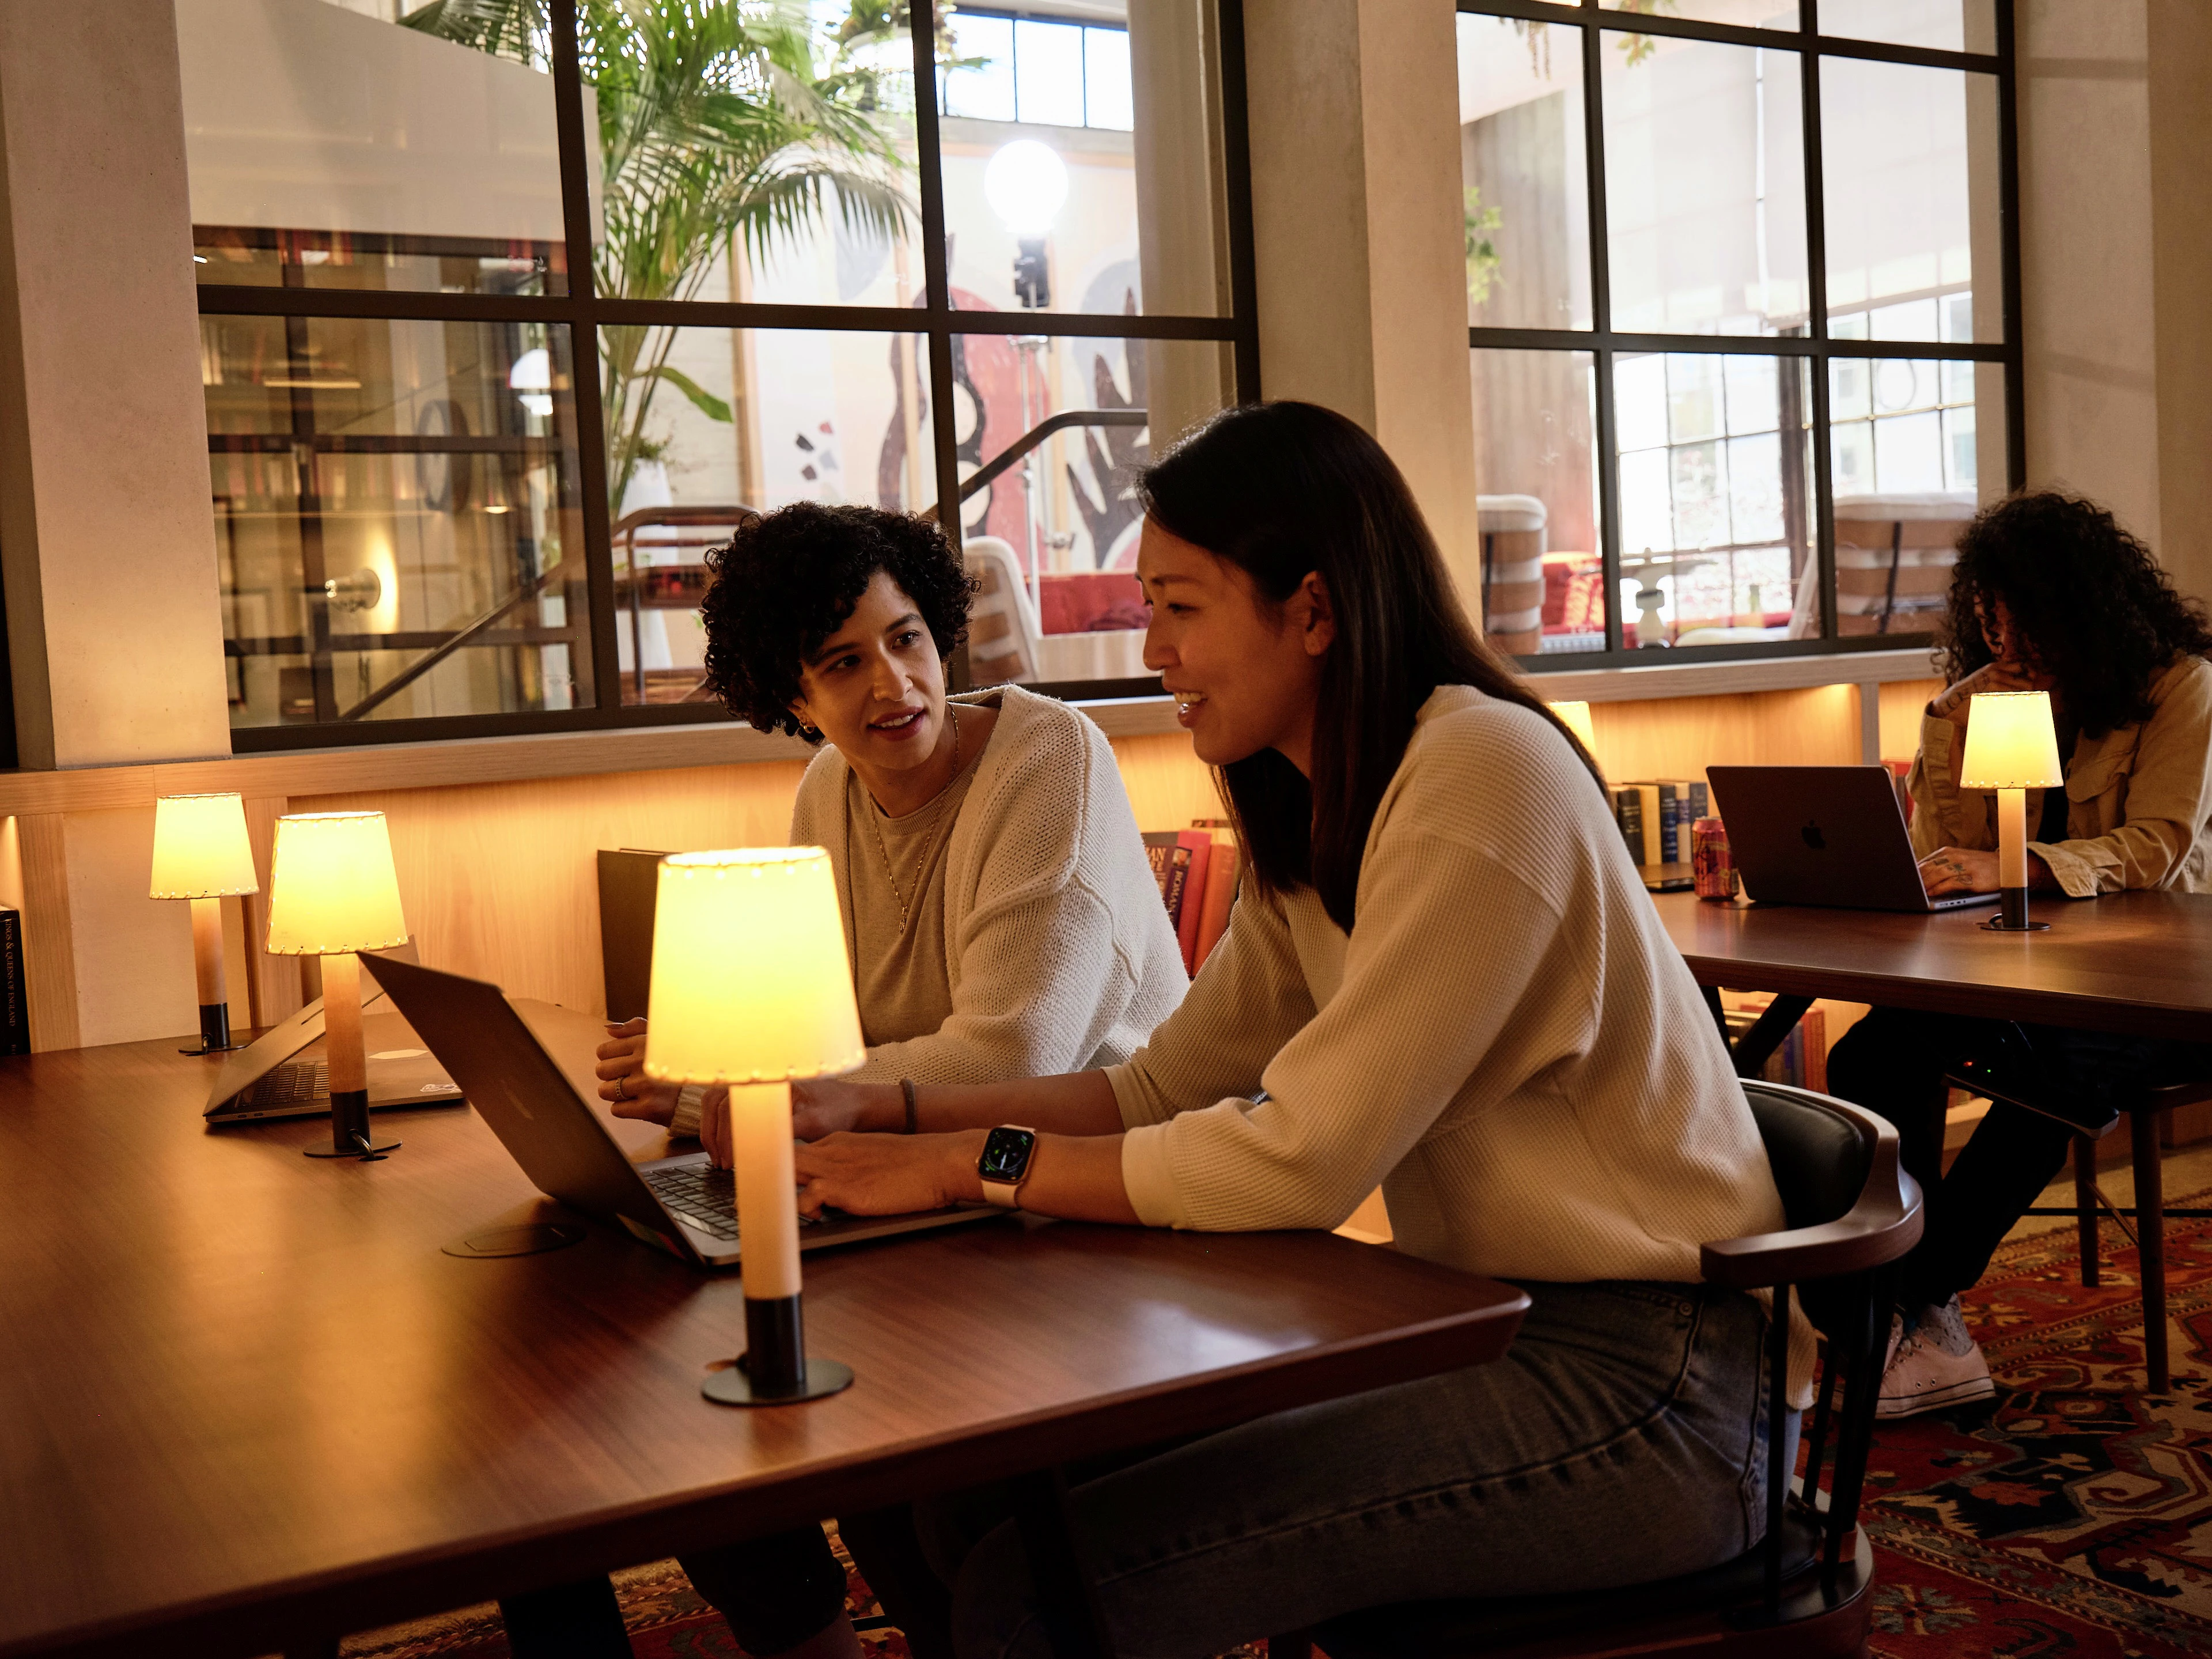 Two women, one with curly hair, are seated at a table working on tablets and conversing in a warmly lit room with table lamps, large windows, and another person in the background.